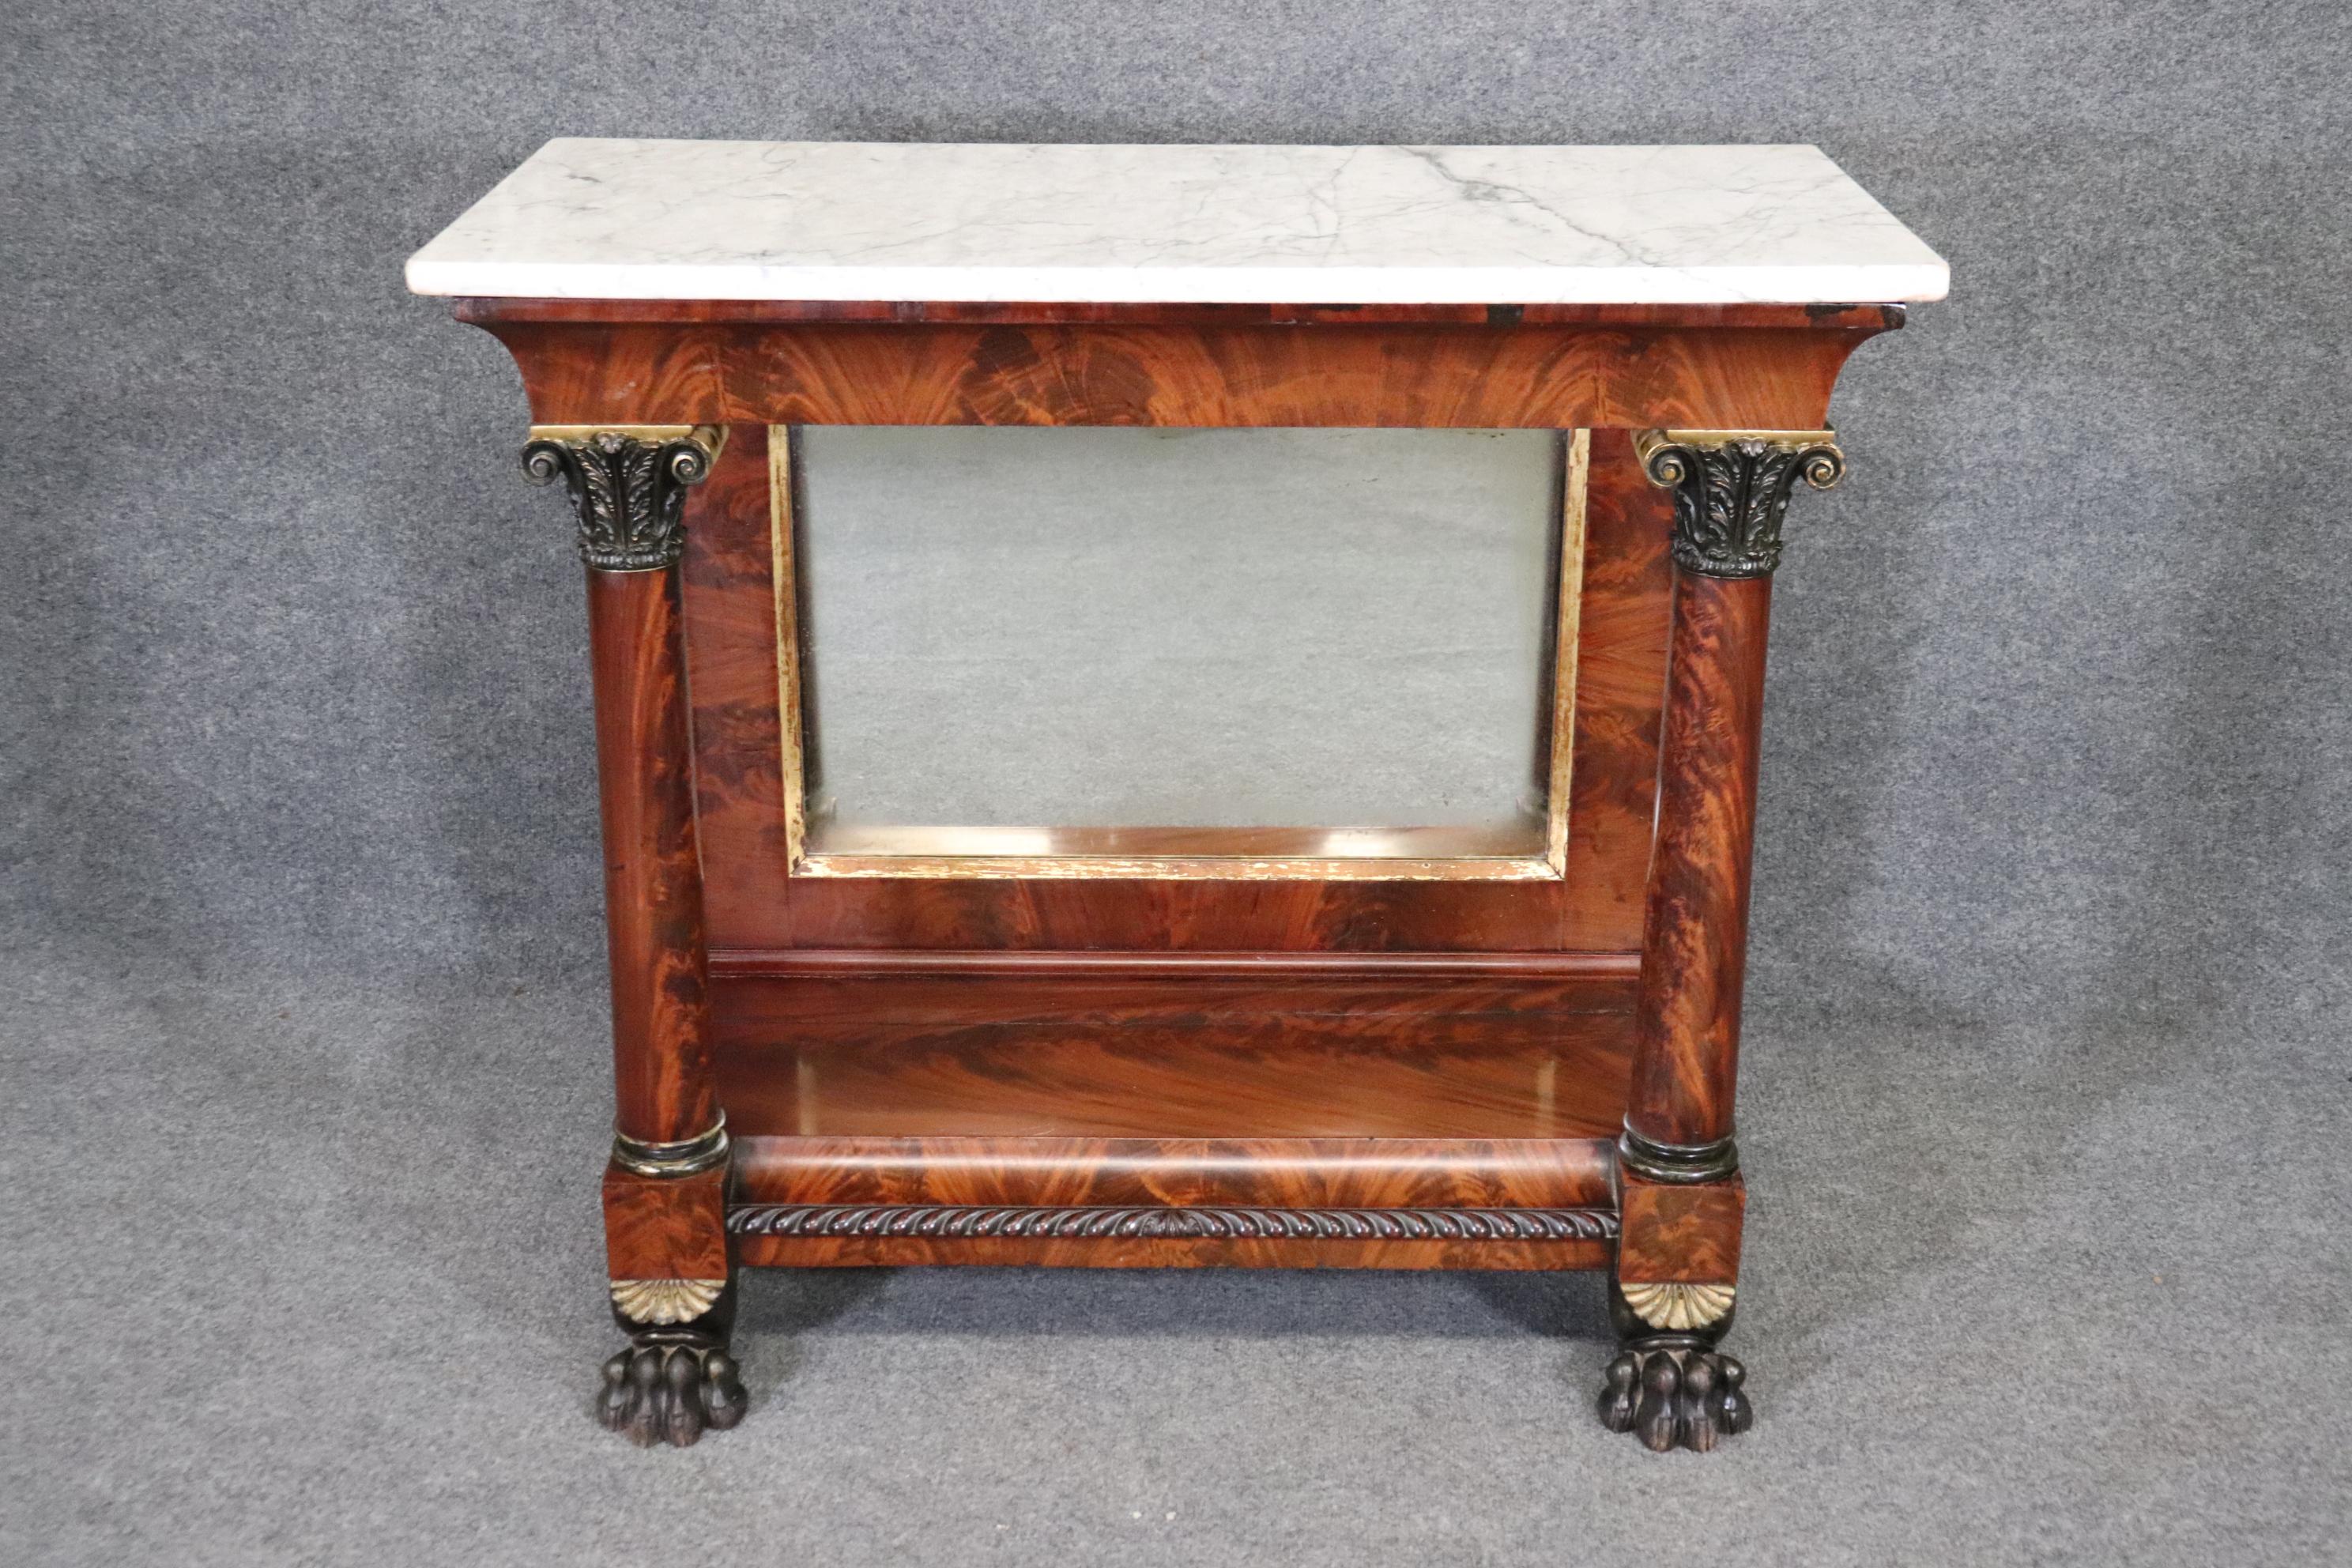 American Rare New York or Philadelphia Flame Mahogany Marble Top Pier Console Table